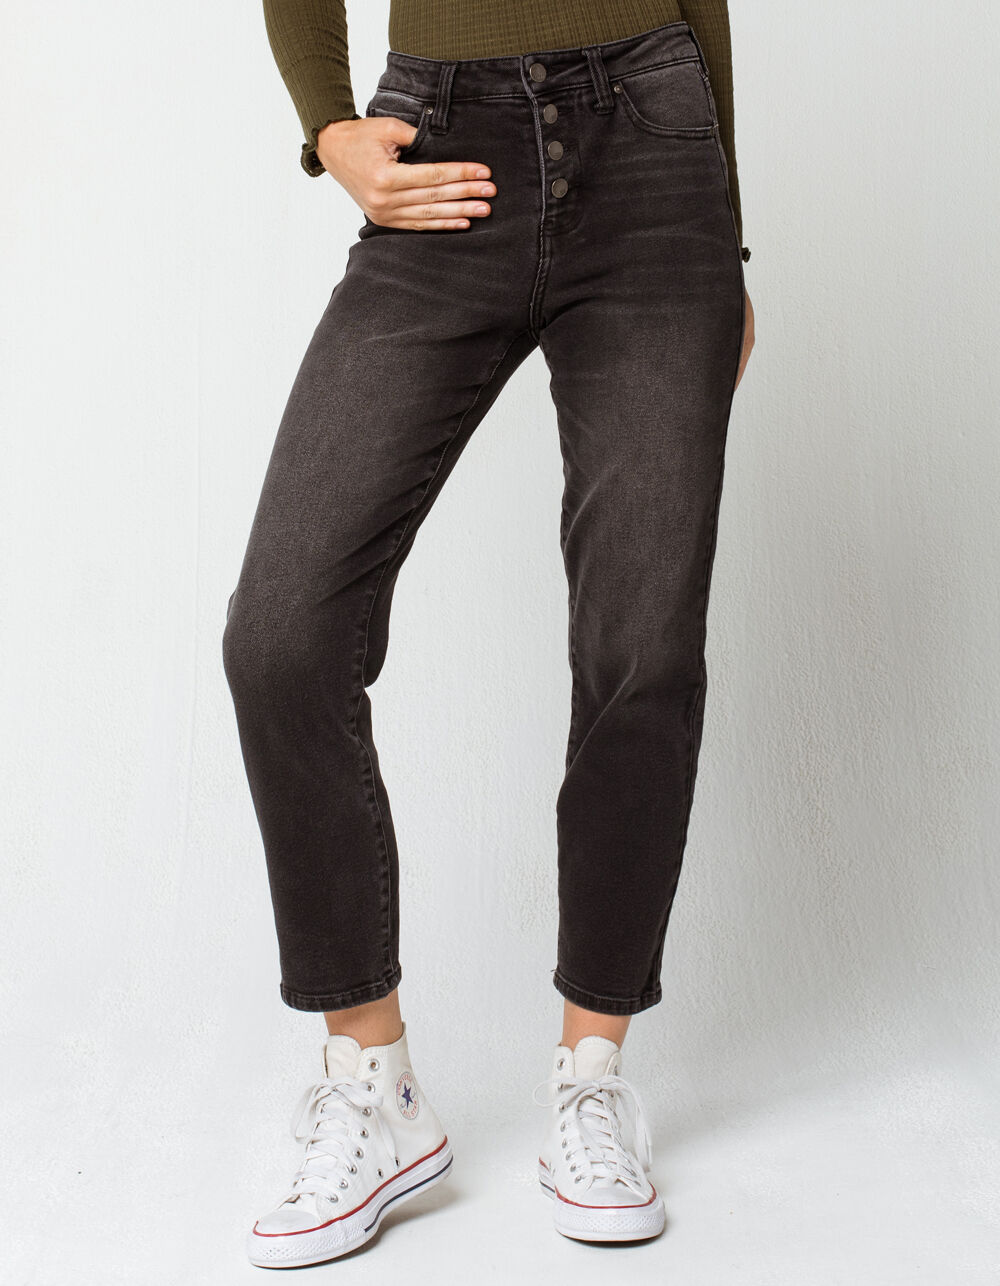 RSQ Exposed Button Womens Wash Black Jeans - WASH BLACK | Tillys